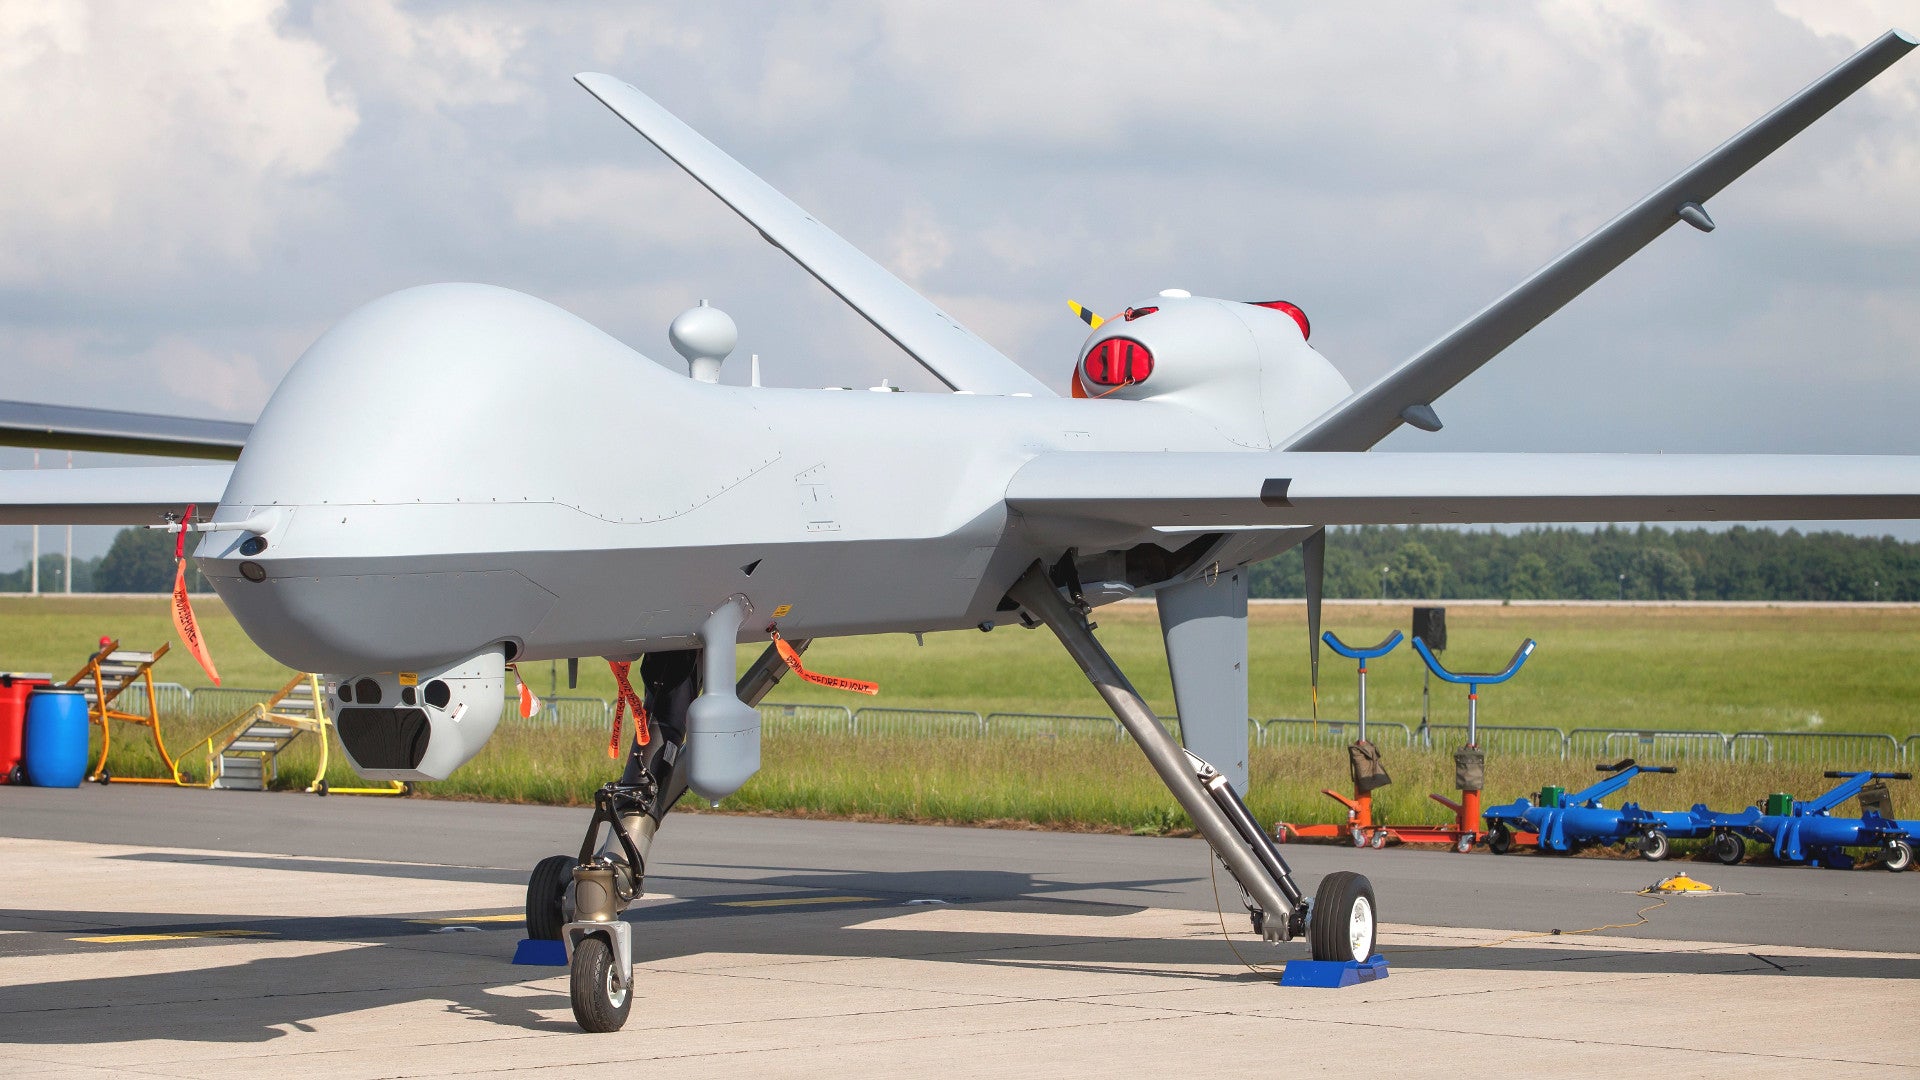 It’s Official, Contractor-Owned MQ-9 Reaper Drones Will Watch Over Marines in Afghanistan